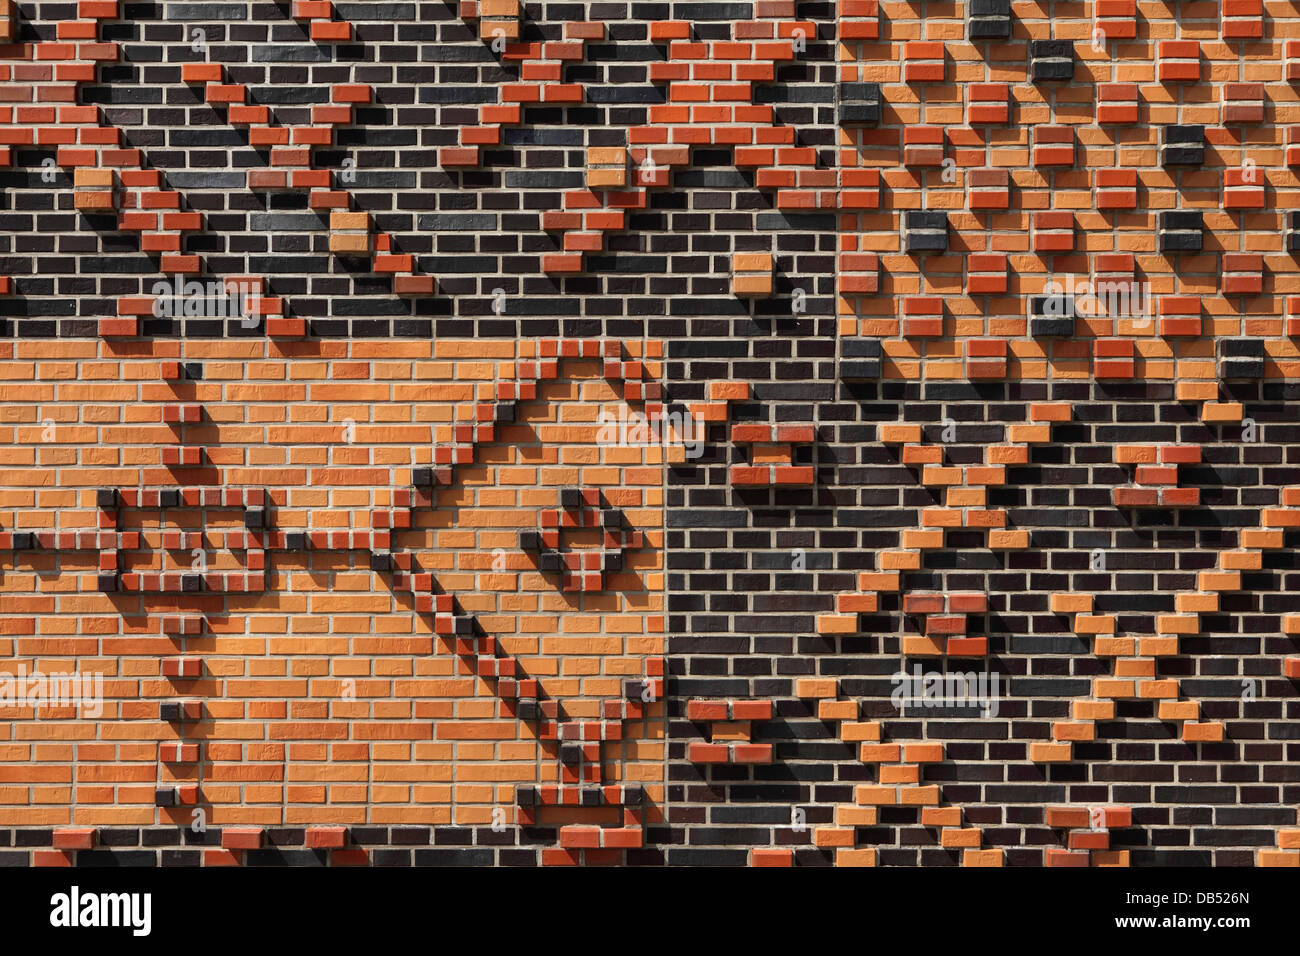 Patterned brickwork in the HafenCity district of Hamburg, Germany. Stock Photo